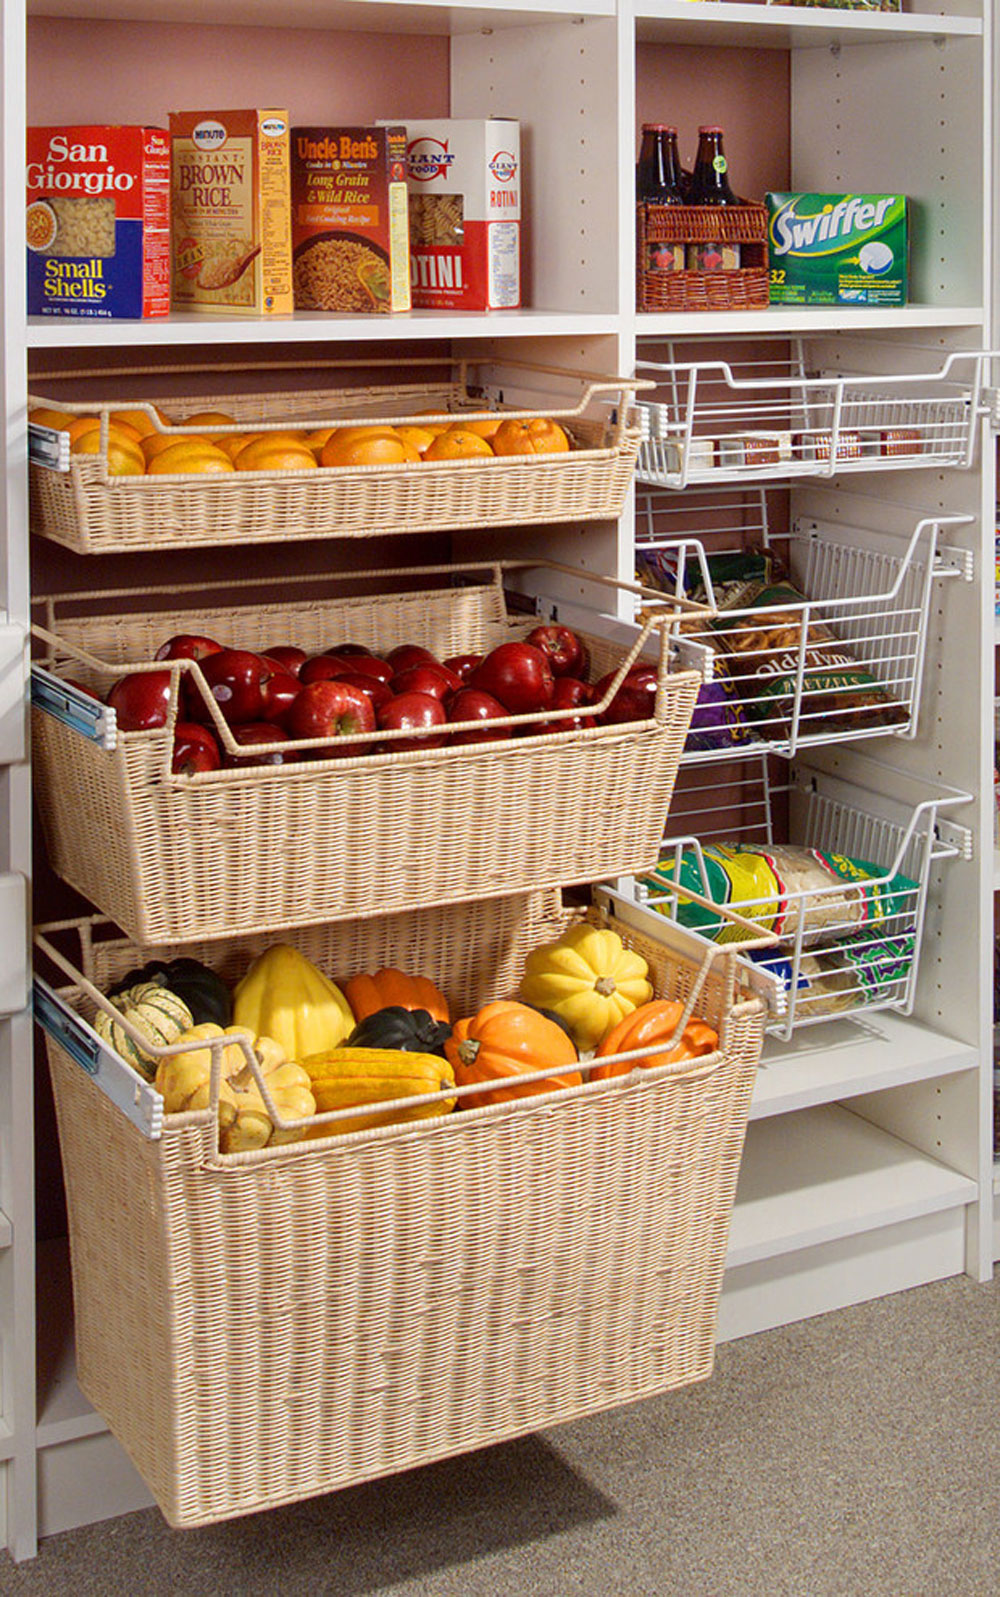 Floor-Based-Closet-Systems-by-Closets-and-Shelving-LLC Pantry cabinet ideas: Shelving and storage ideas for your kitchen